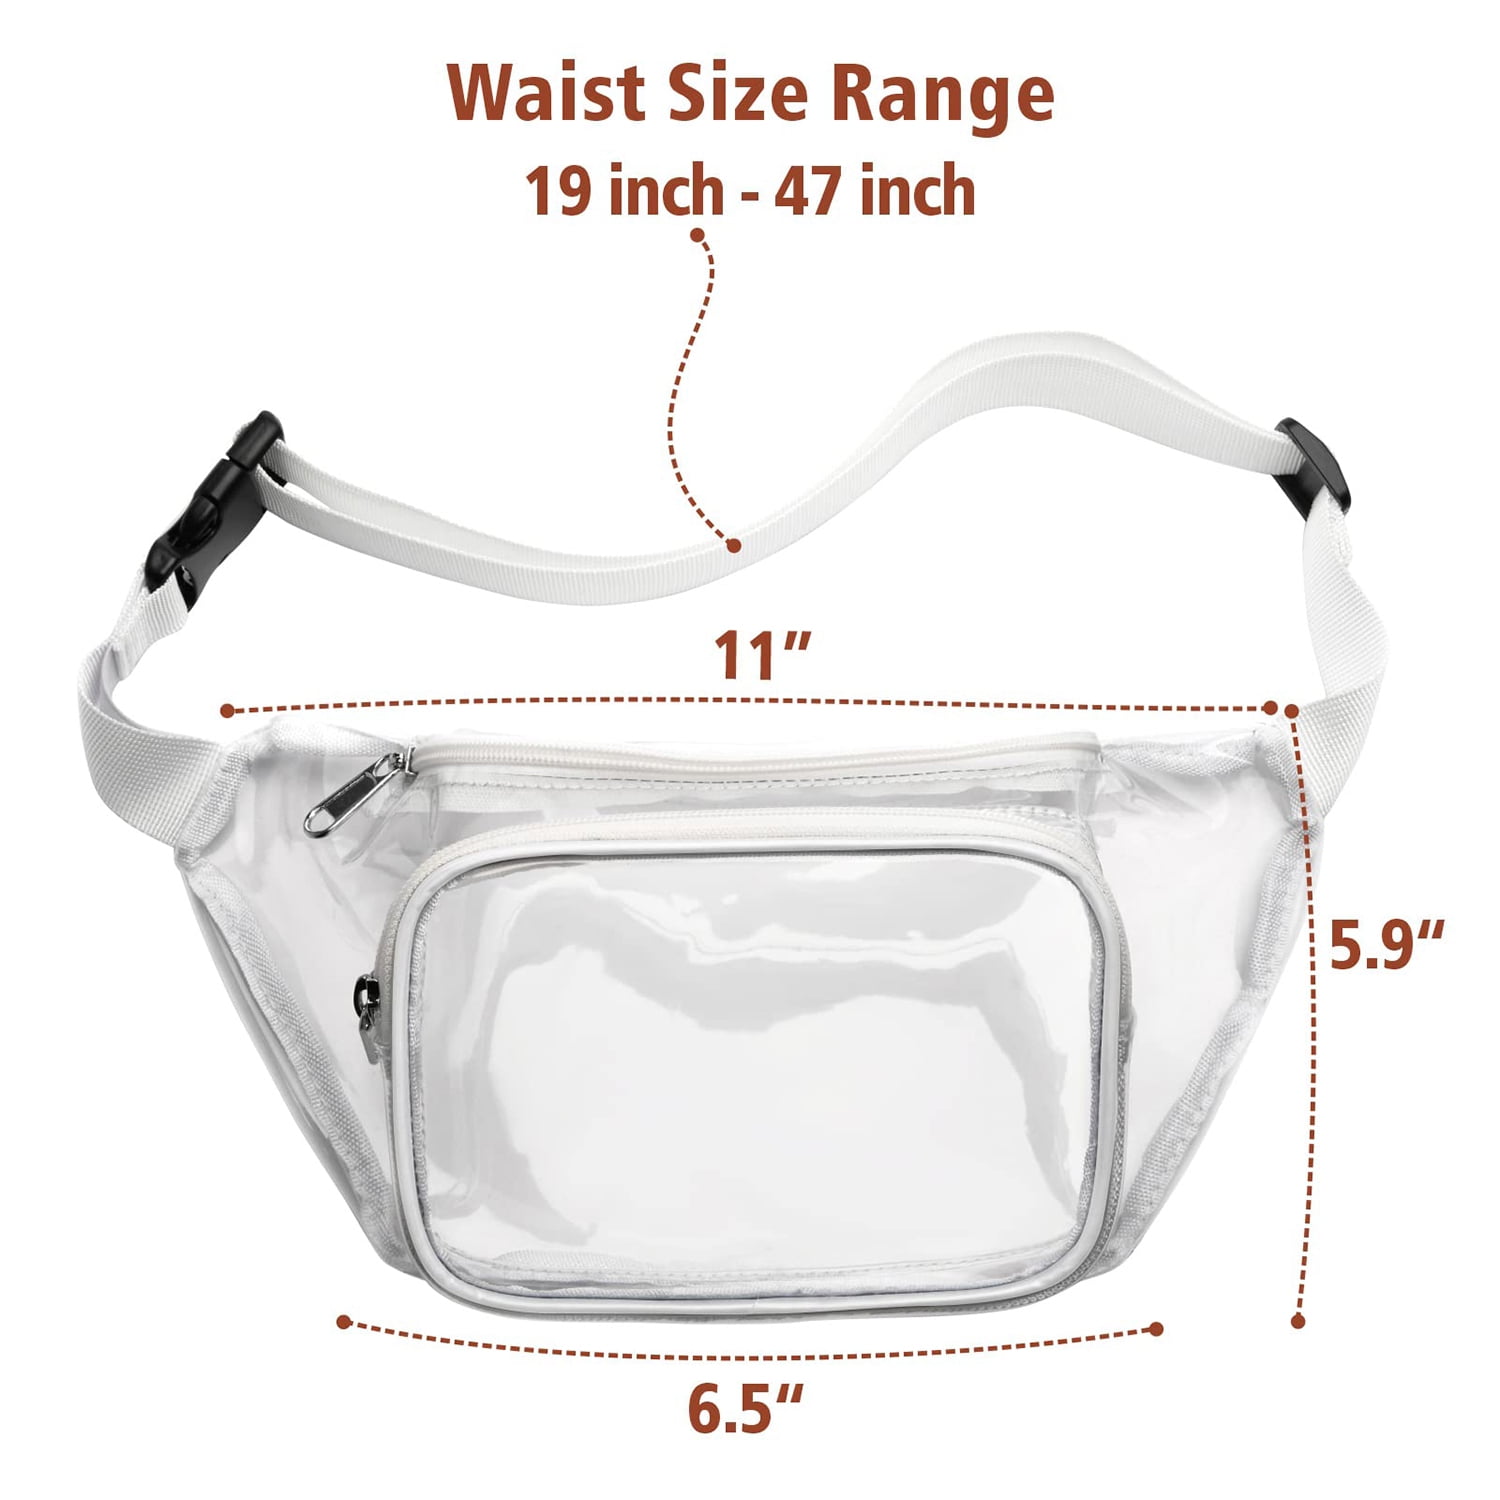  Telena Clear Fanny Pack Stadium Approved Clear Sling Bag  Crossbody bag Purses for Women Transparent Waist Bag with Adjustable Strap  Clear White